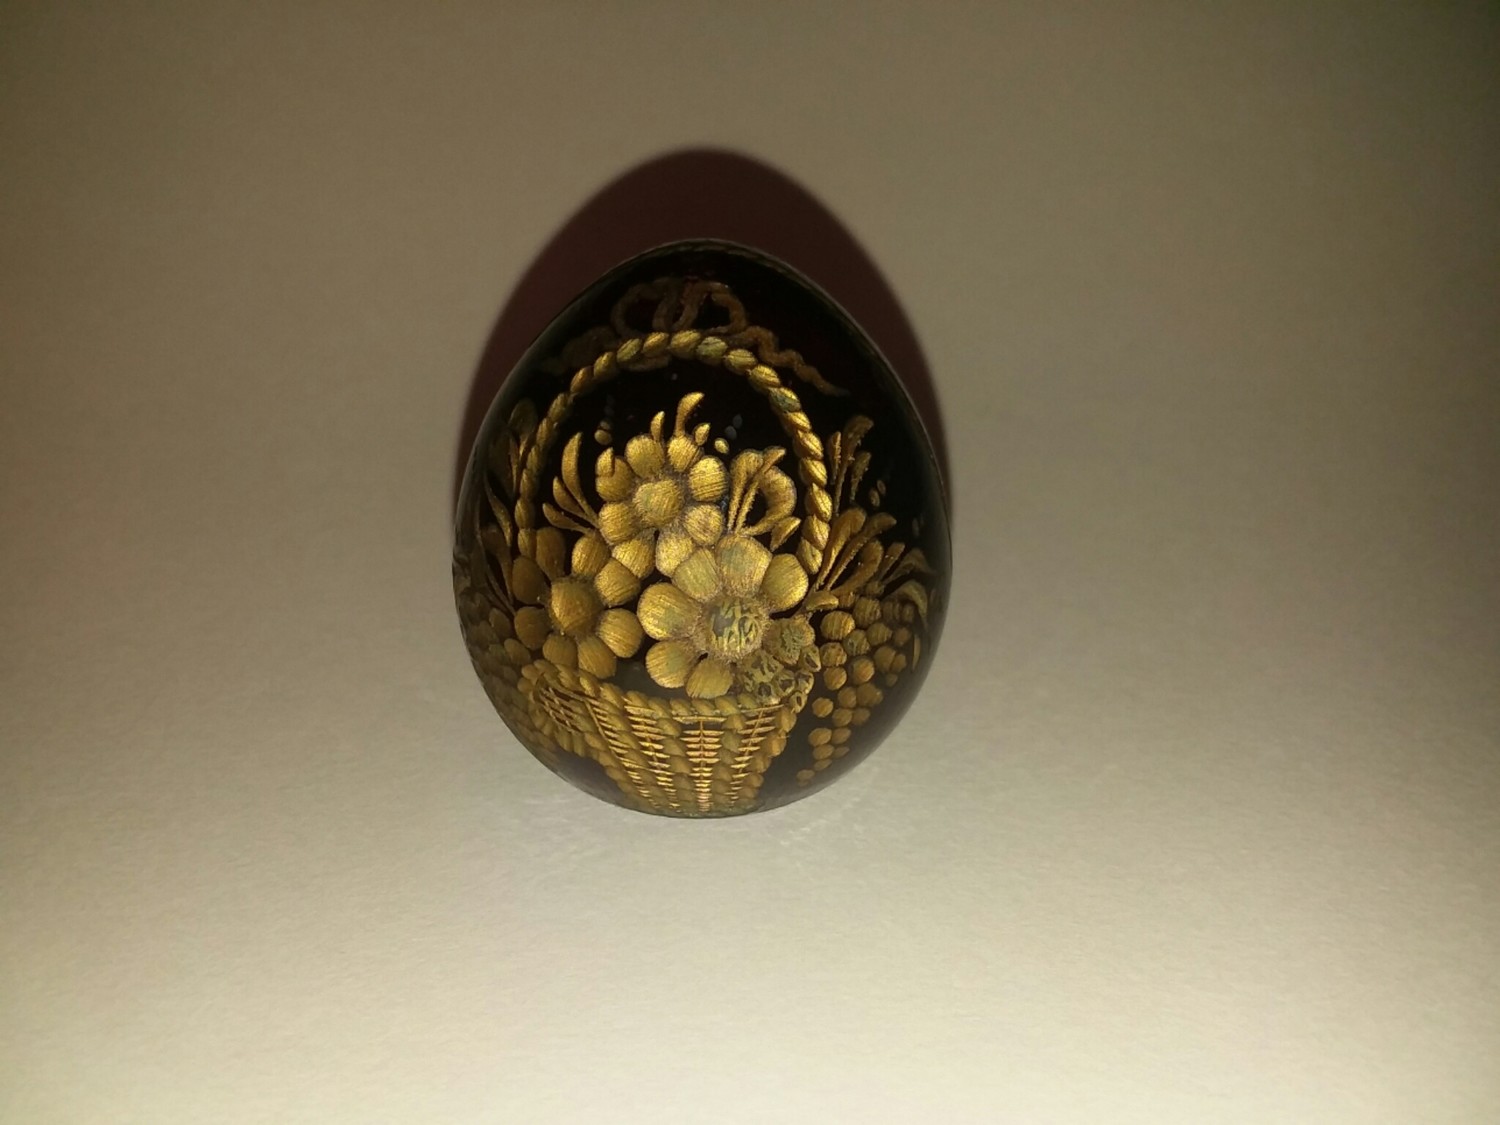 Russian Faberge Egg